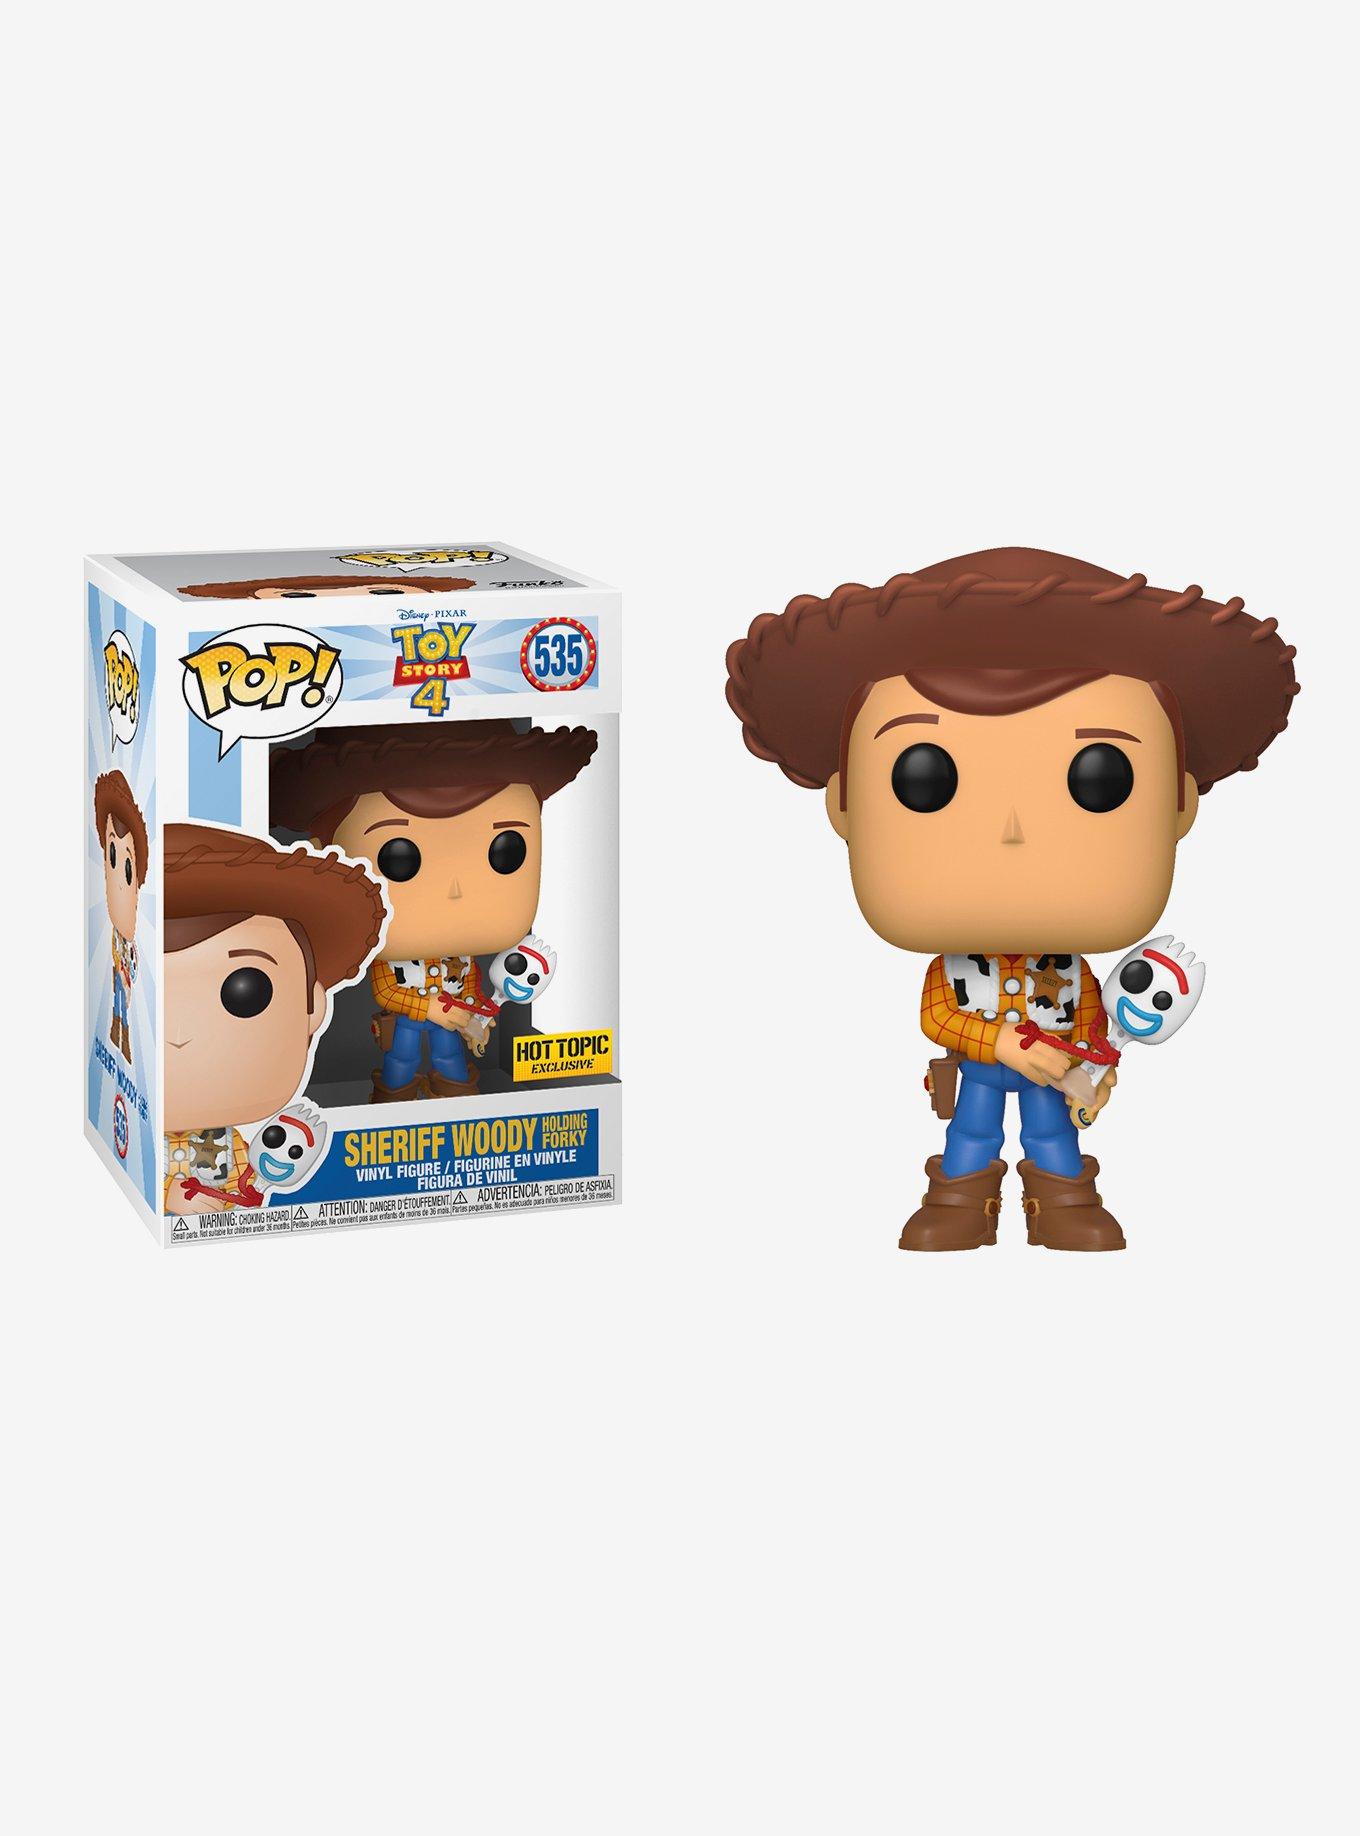 Funko Disney Pixar Toy Story 4 Pop! Sheriff Woody Holding Forky Vinyl Figure Hot Topic Exclusive, , hi-res